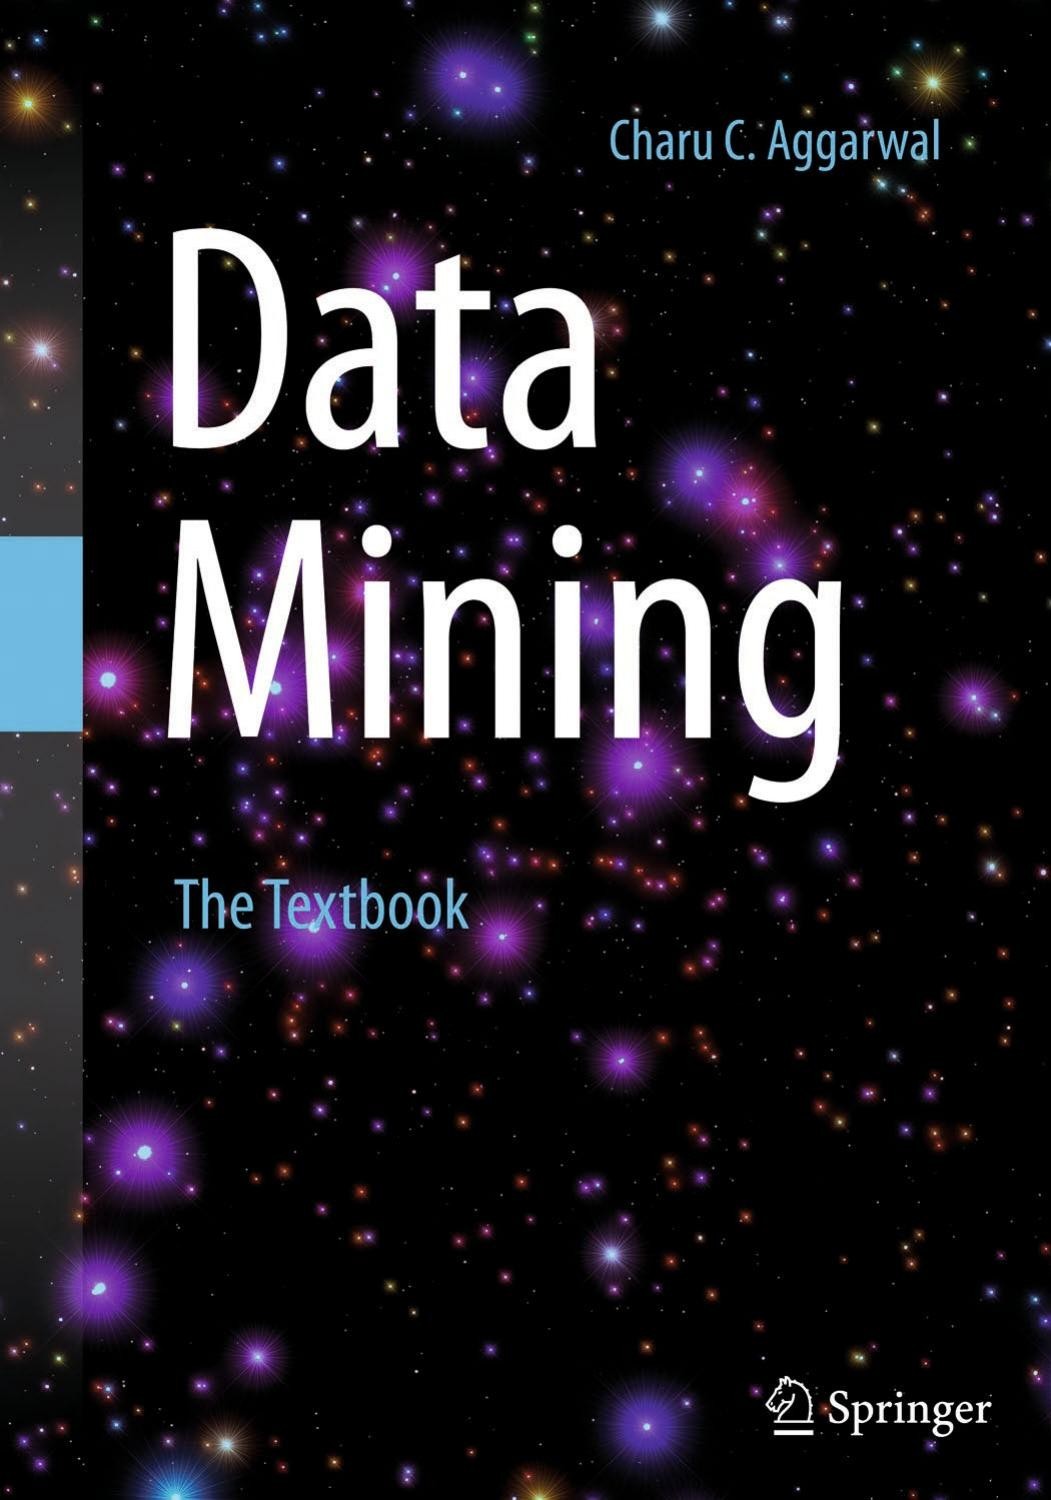 Instructor’s Solution Manual for “Data Mining: The Textbook”